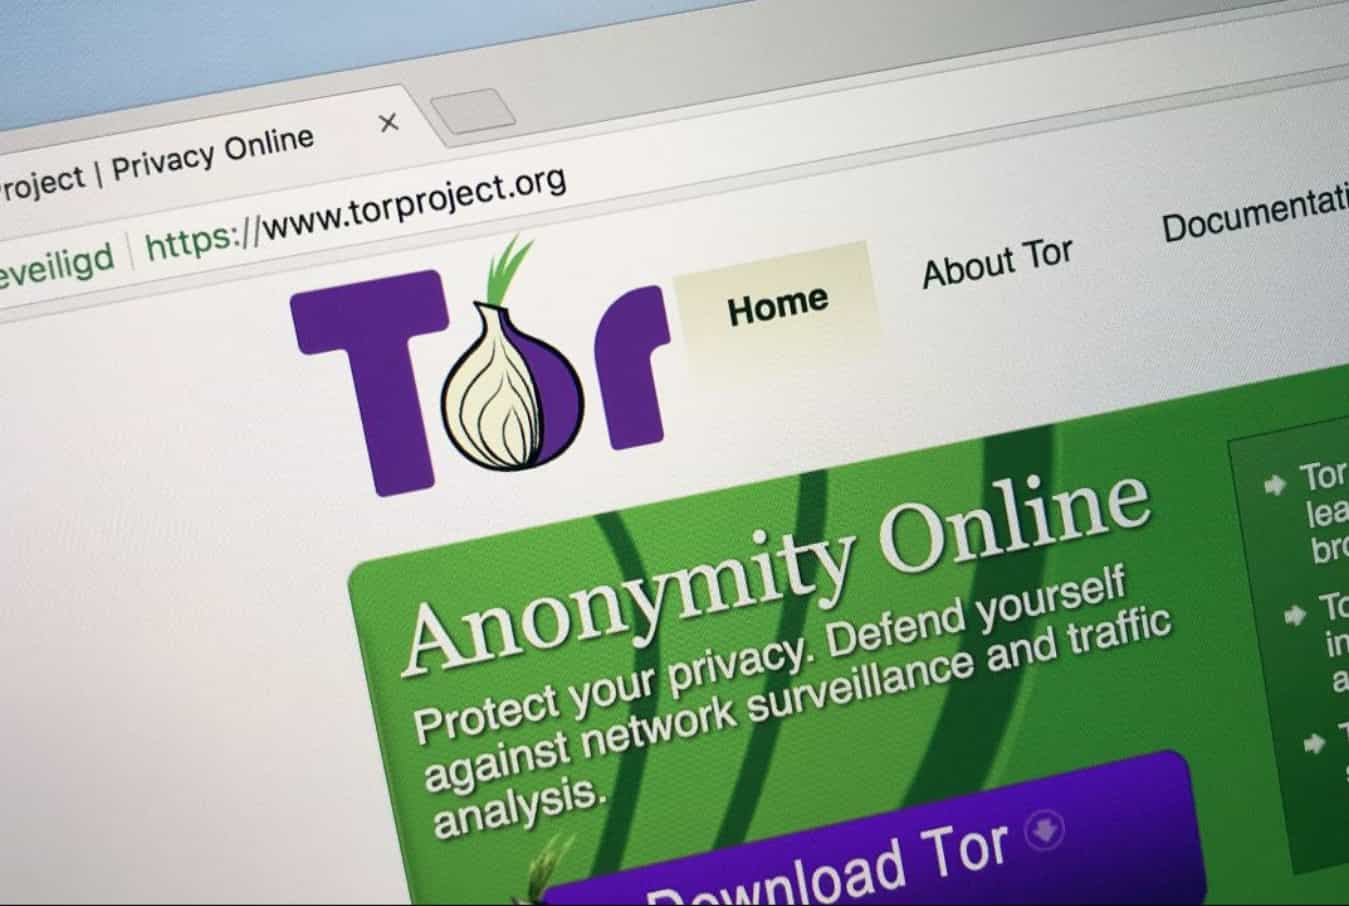 a tor browser exposes you to the risk of having your bitcoins stolen mega вход